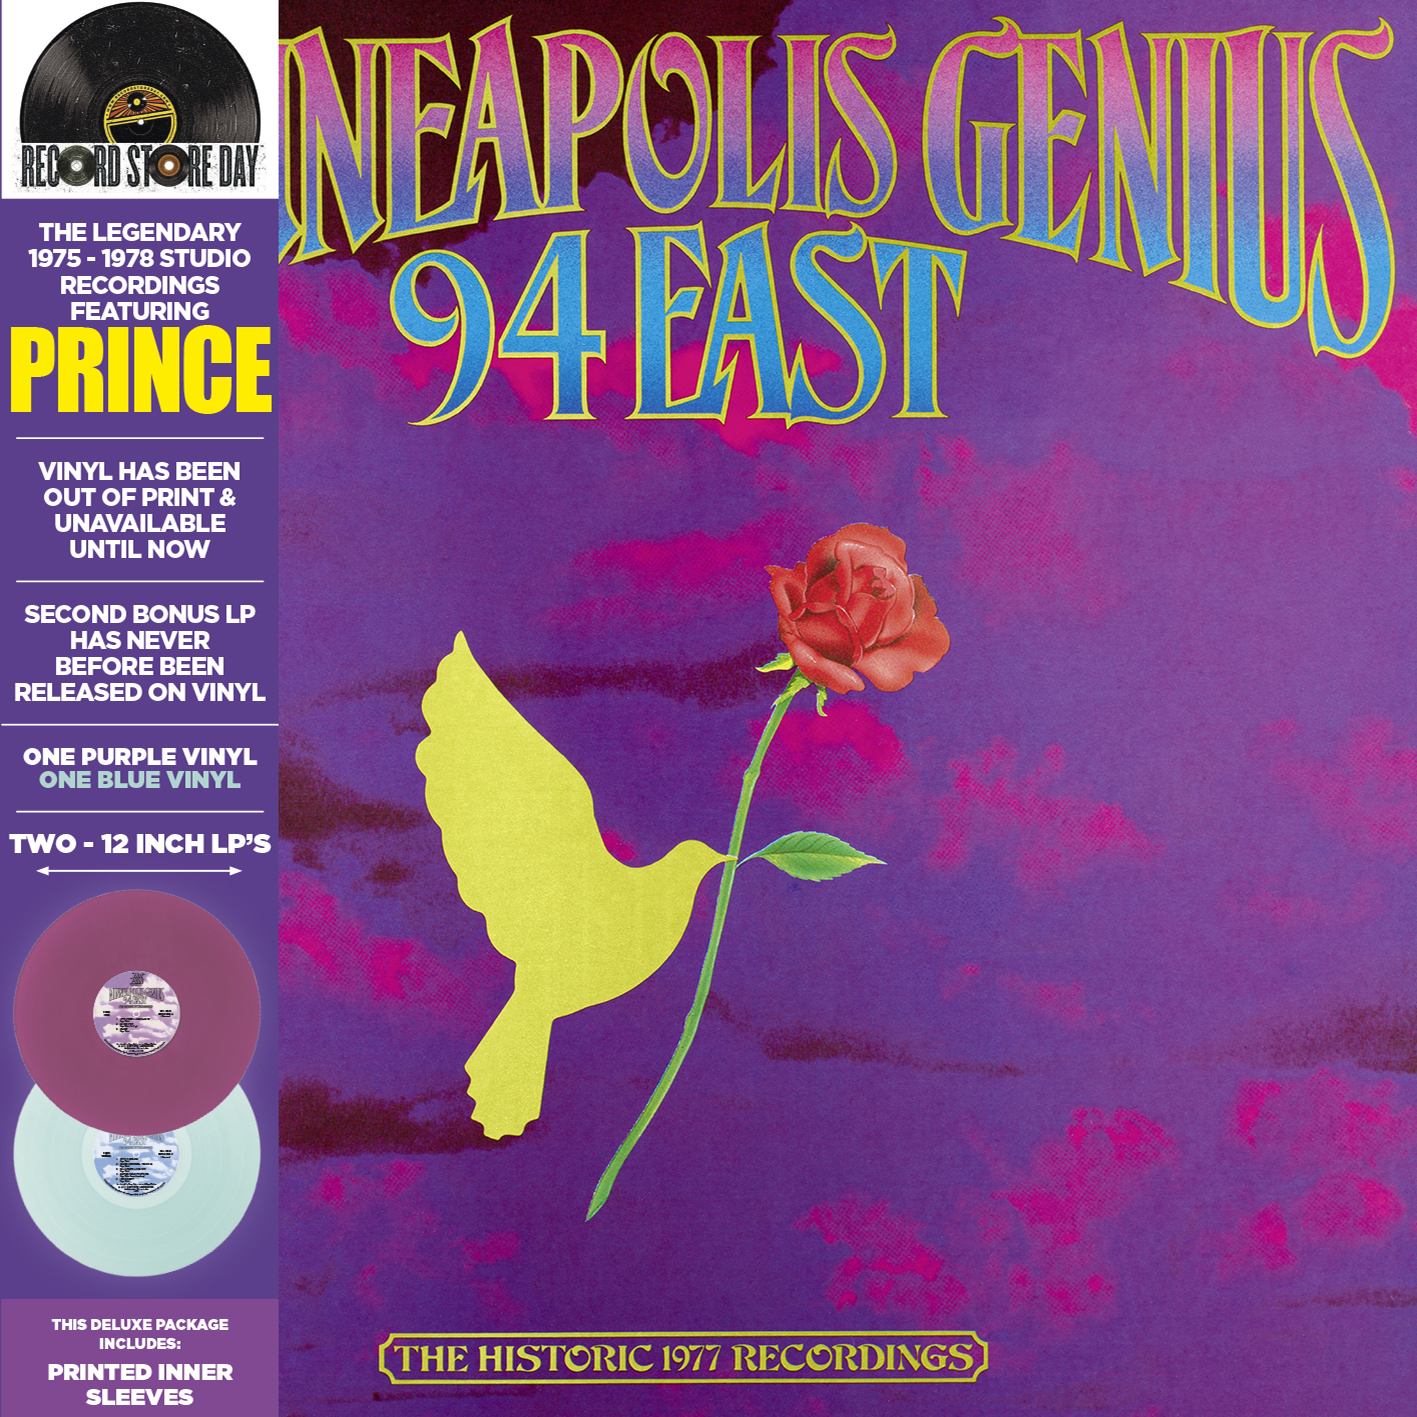 Cover-Vinyl-94-East-Feat.-Prince-Minneapolis-Genius-With-Foldover